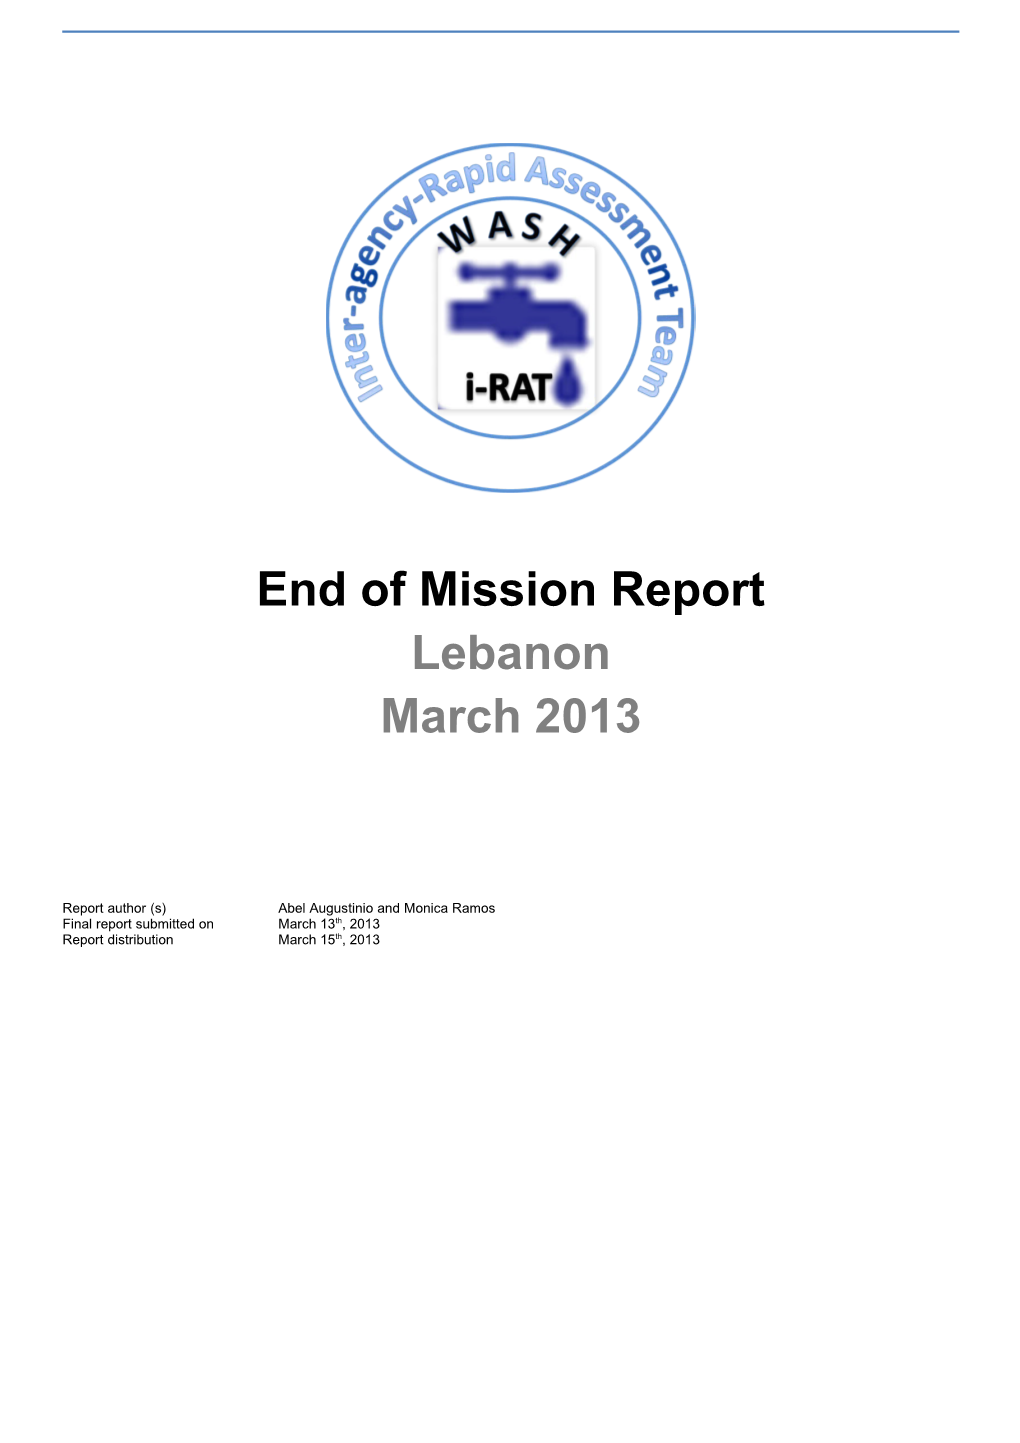 End of Mission Report s1